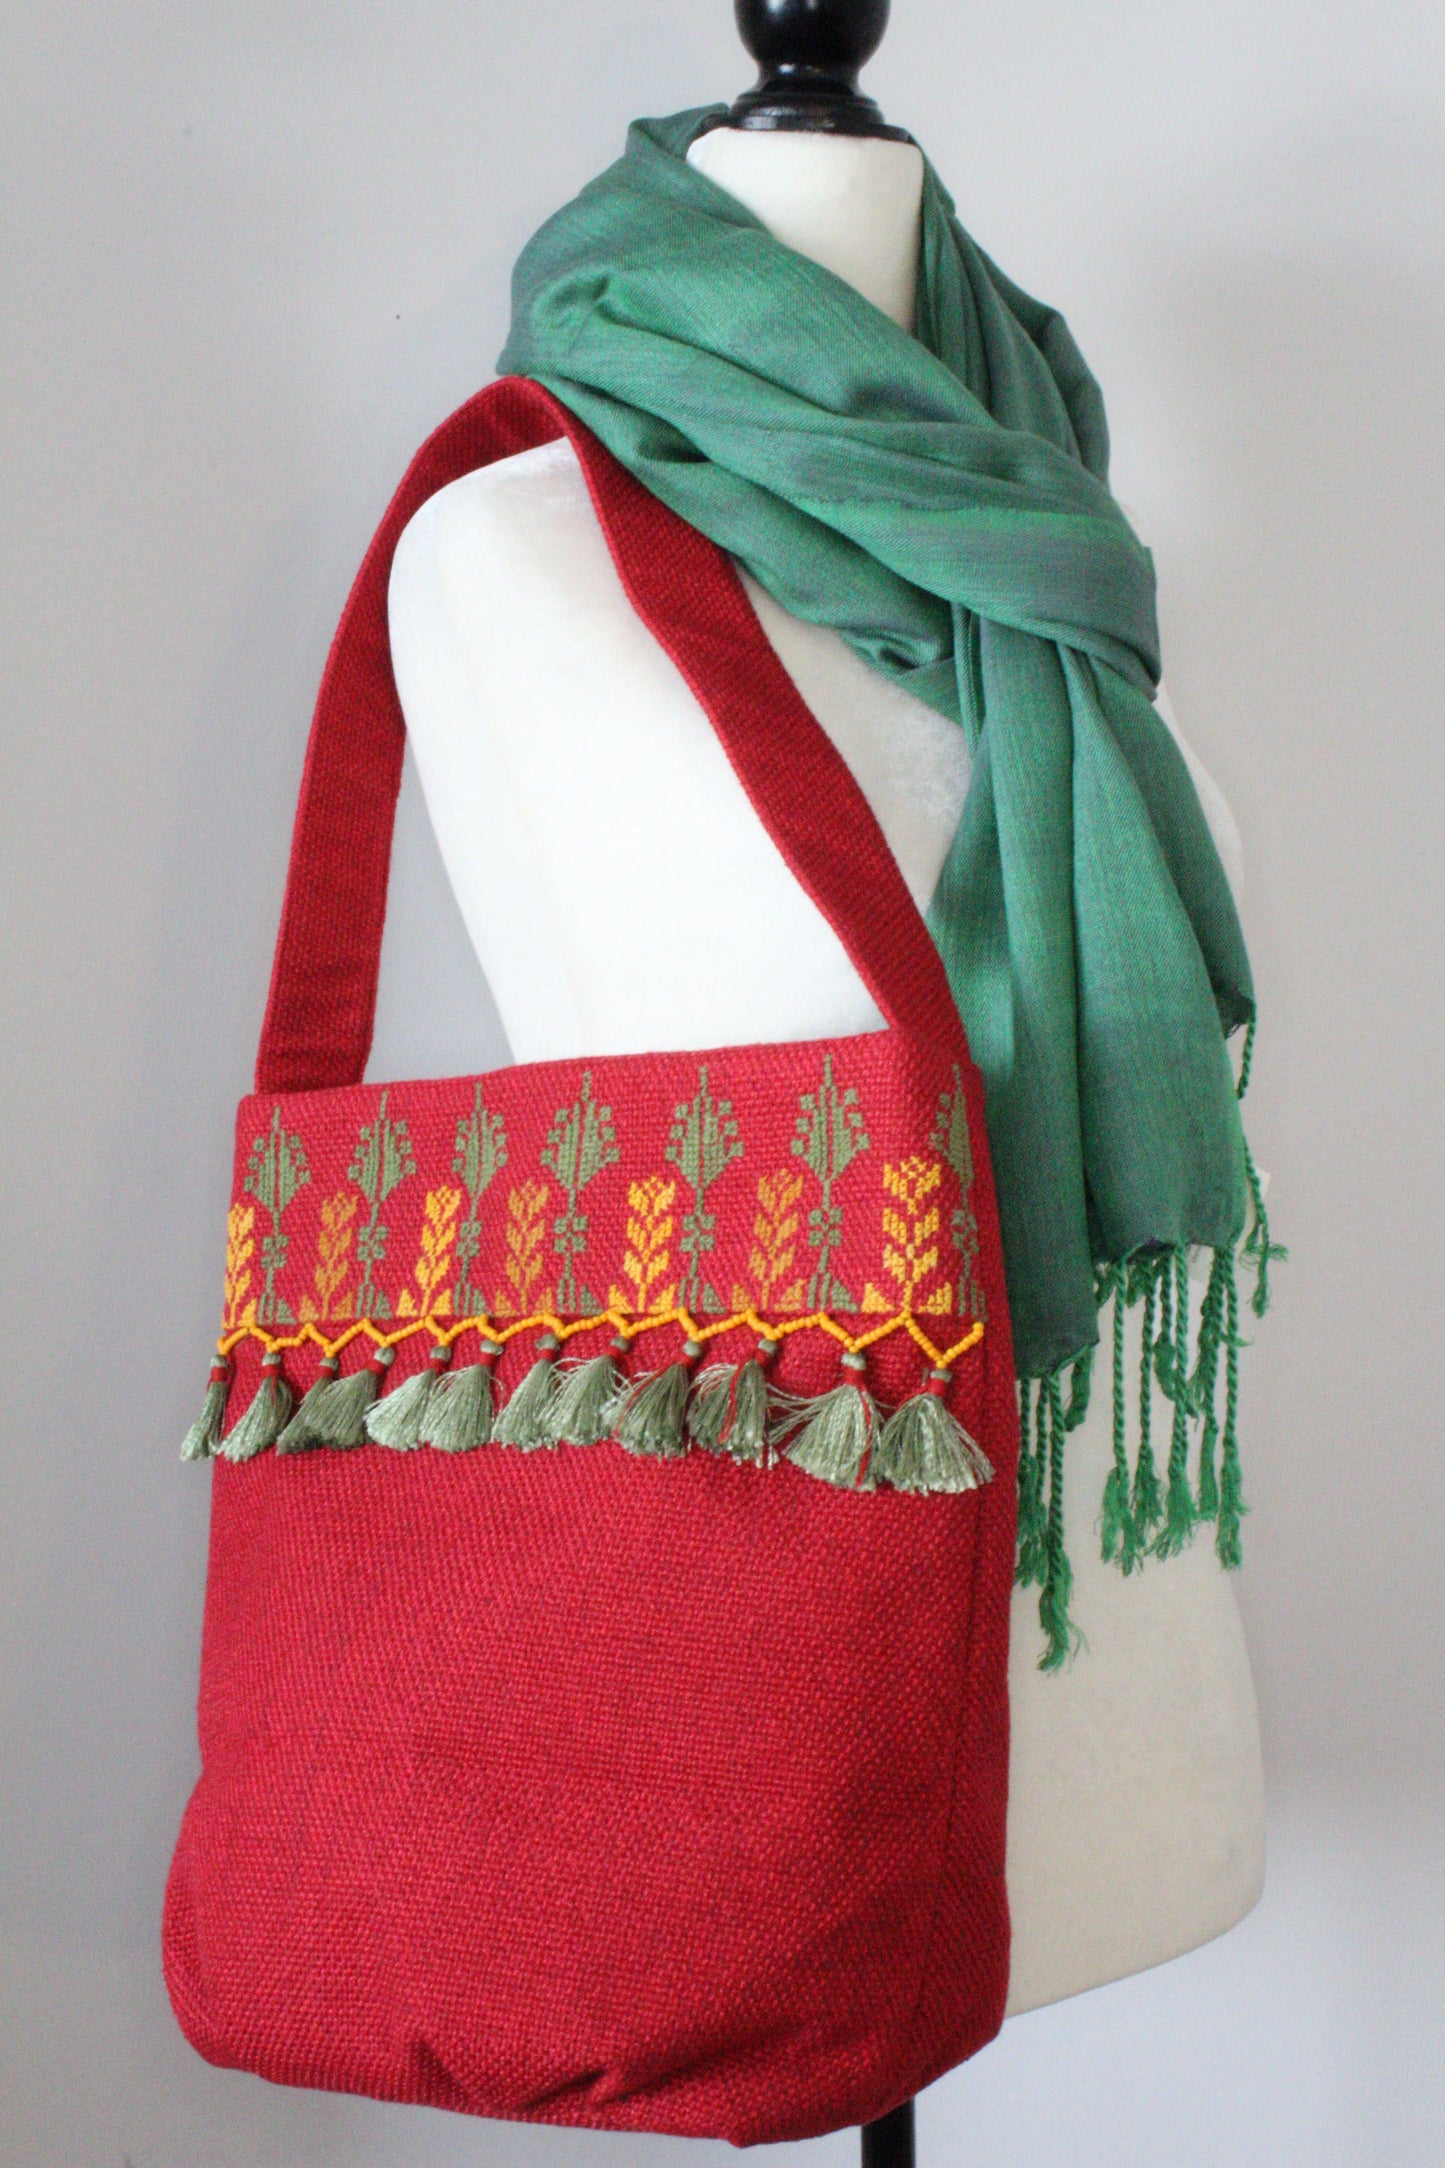 Kholoud Handcrafted Shoulder Bag with Arish Stitching - Red